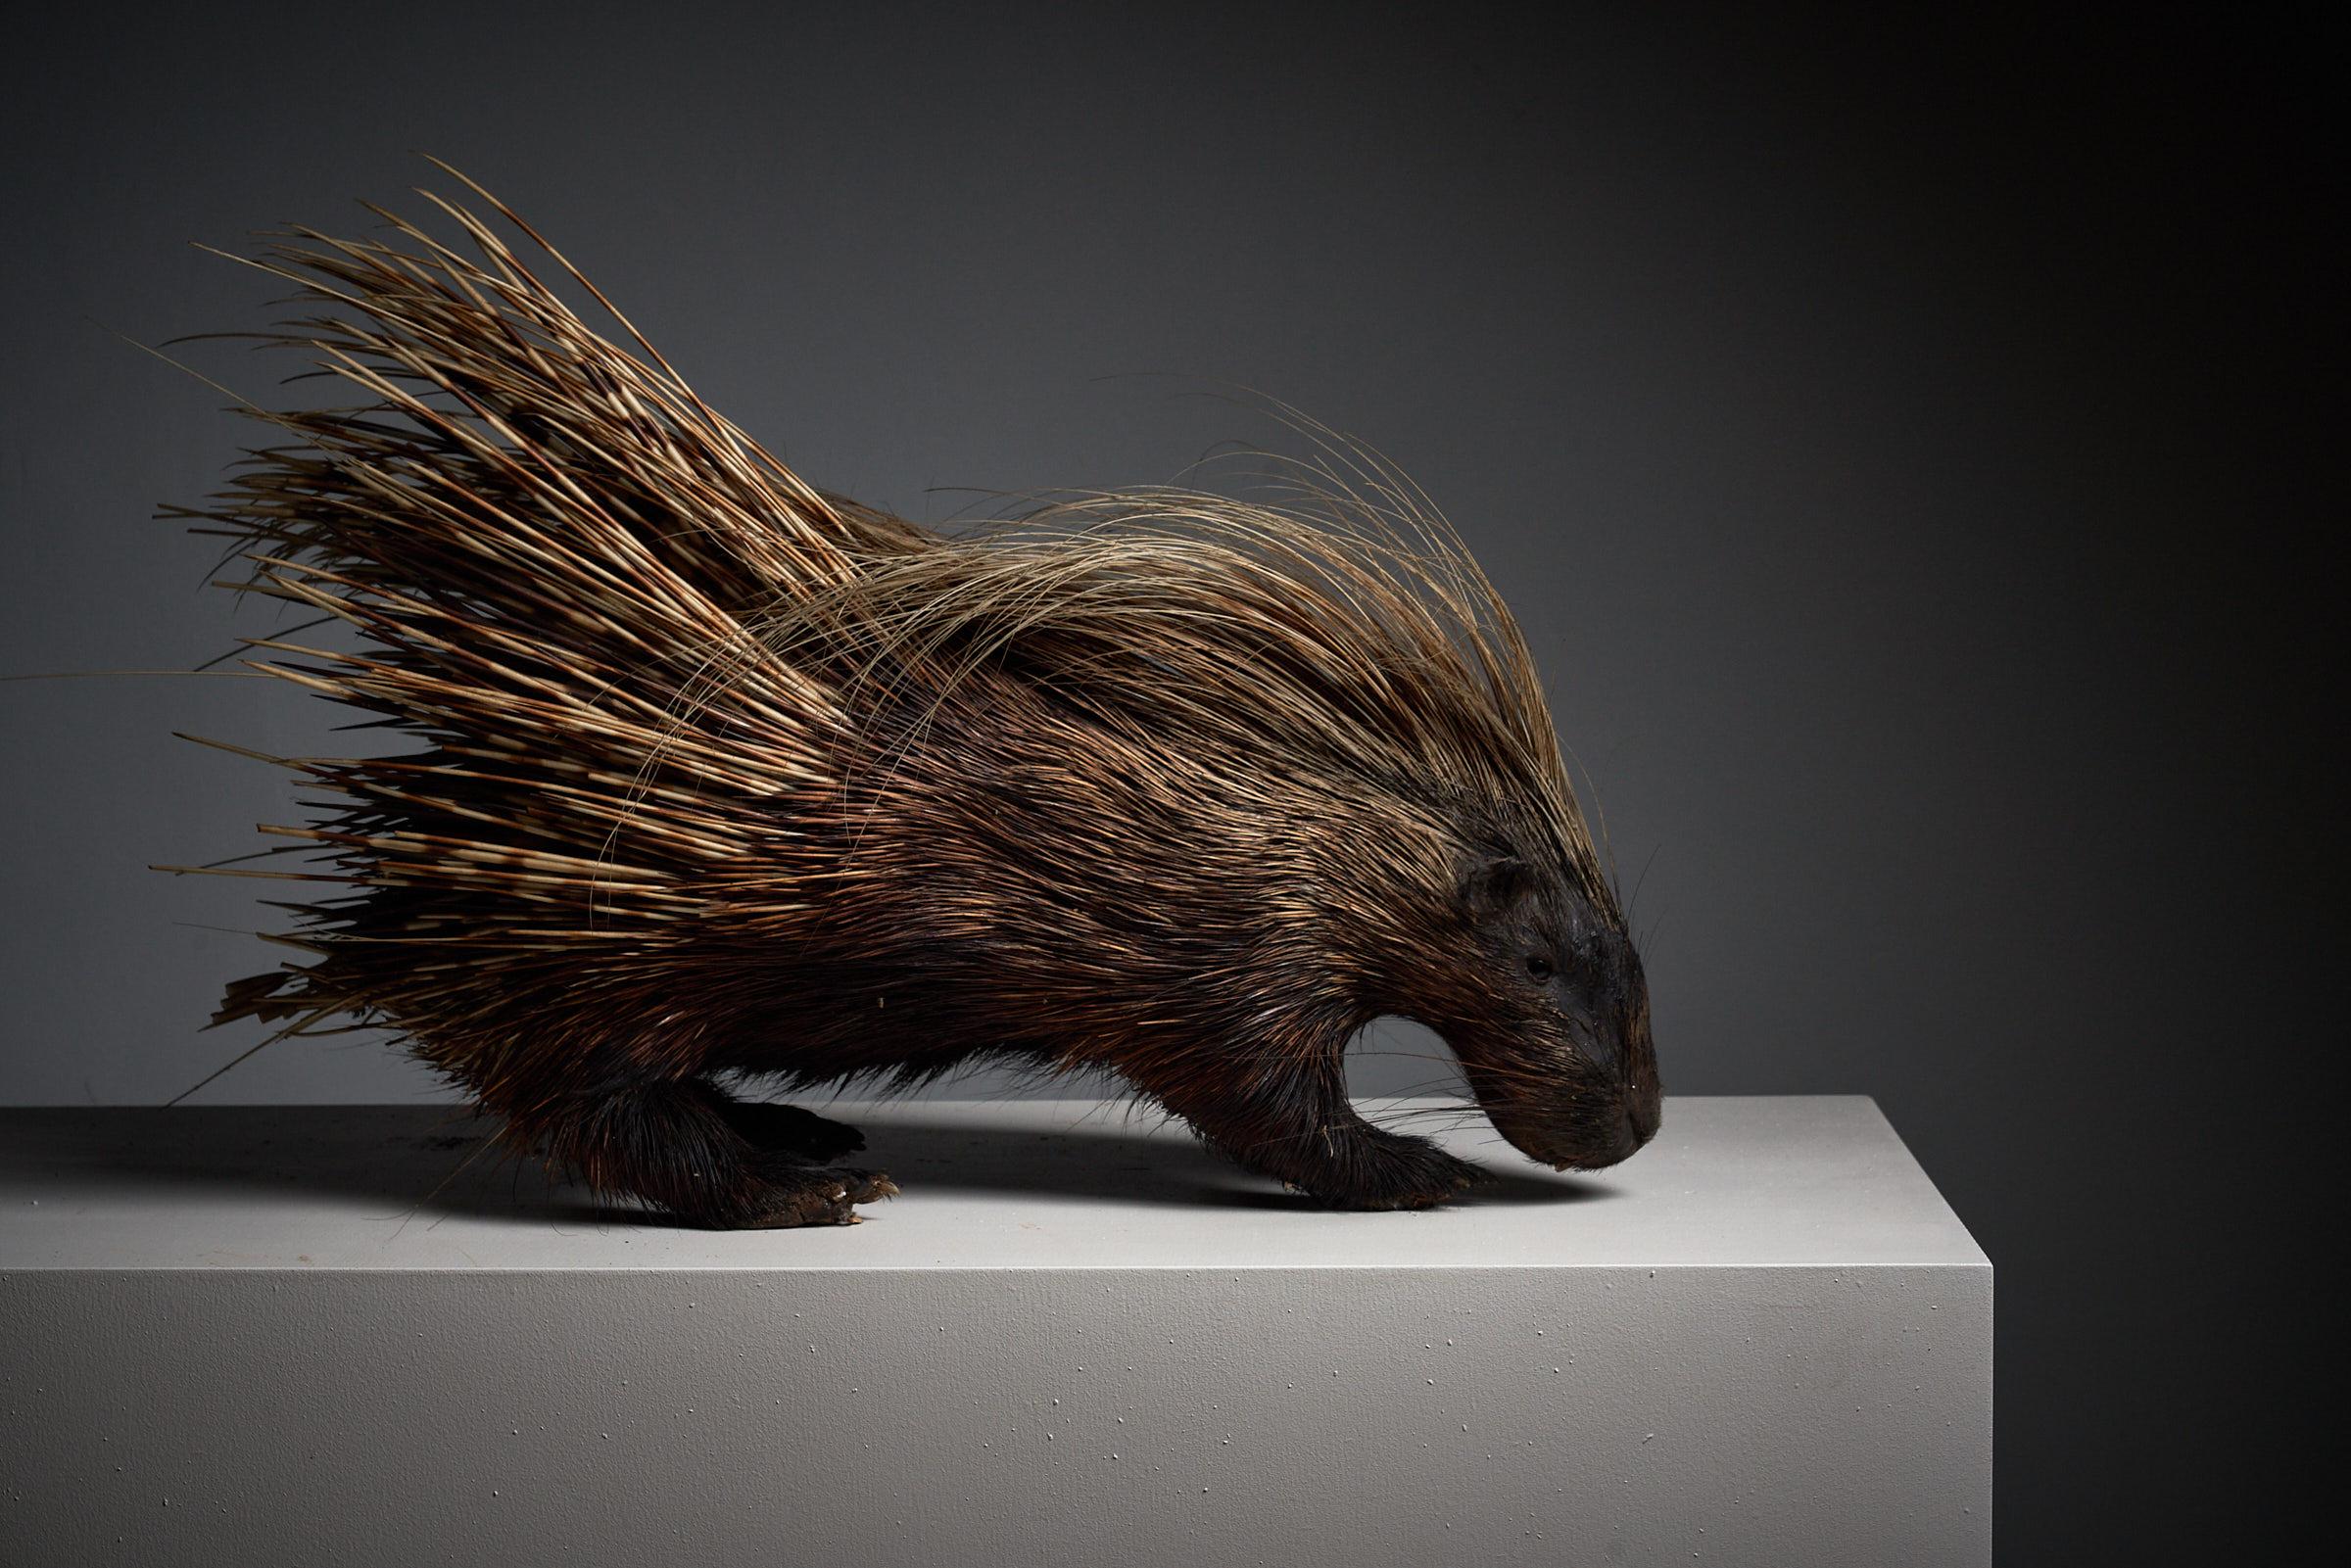 Introduce intrigue and conversation to your space with this antique Porcupine Taxidermy Mount. Despite its fragility and charming signs of age, this life-size full porcupine is a captivating addition to your interior. The unique character of the